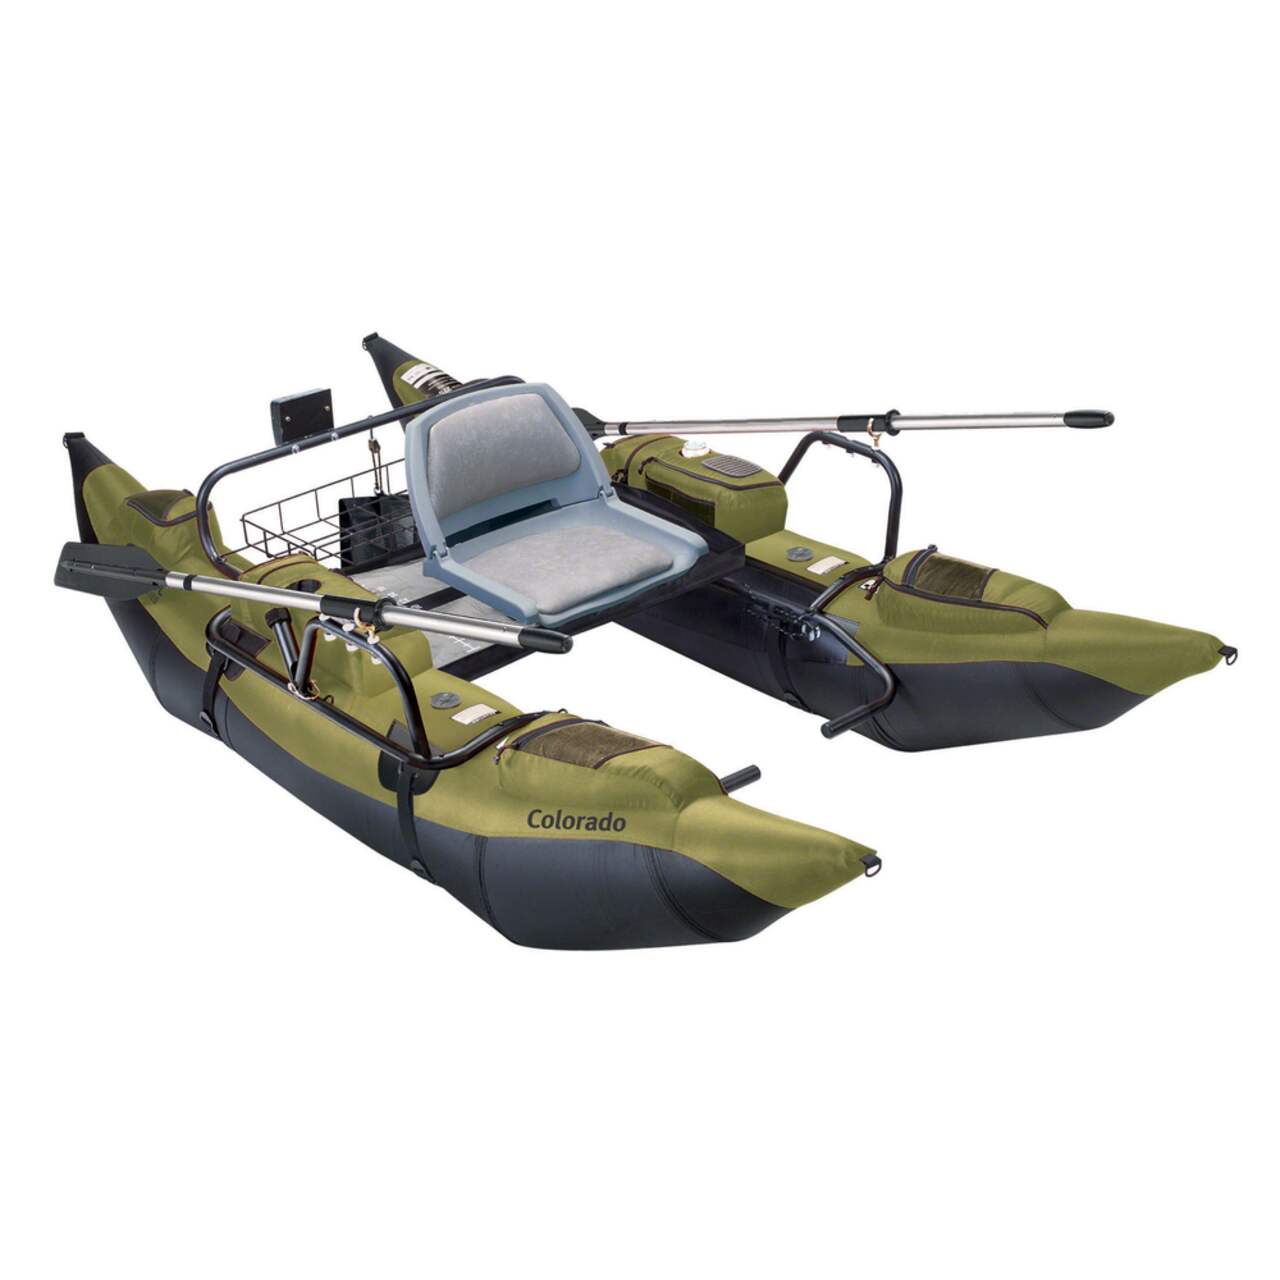 Colorado 1-Person Inflatable Fishing Pontoon Boat with Steel Frame